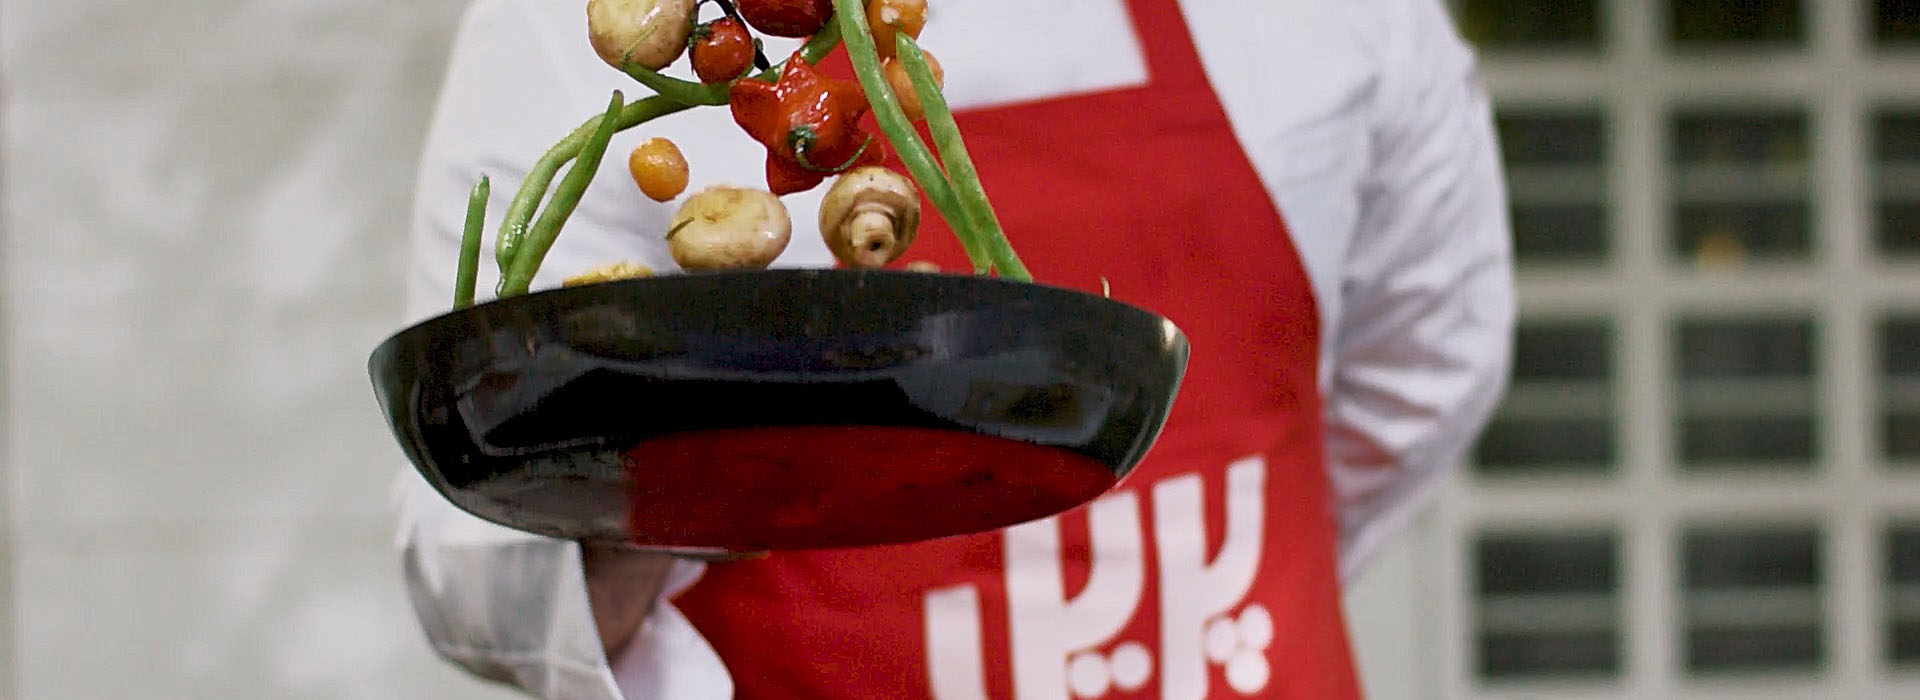 A chef influencer sautéing veggies in a red pril apron for the enjoy together campaign